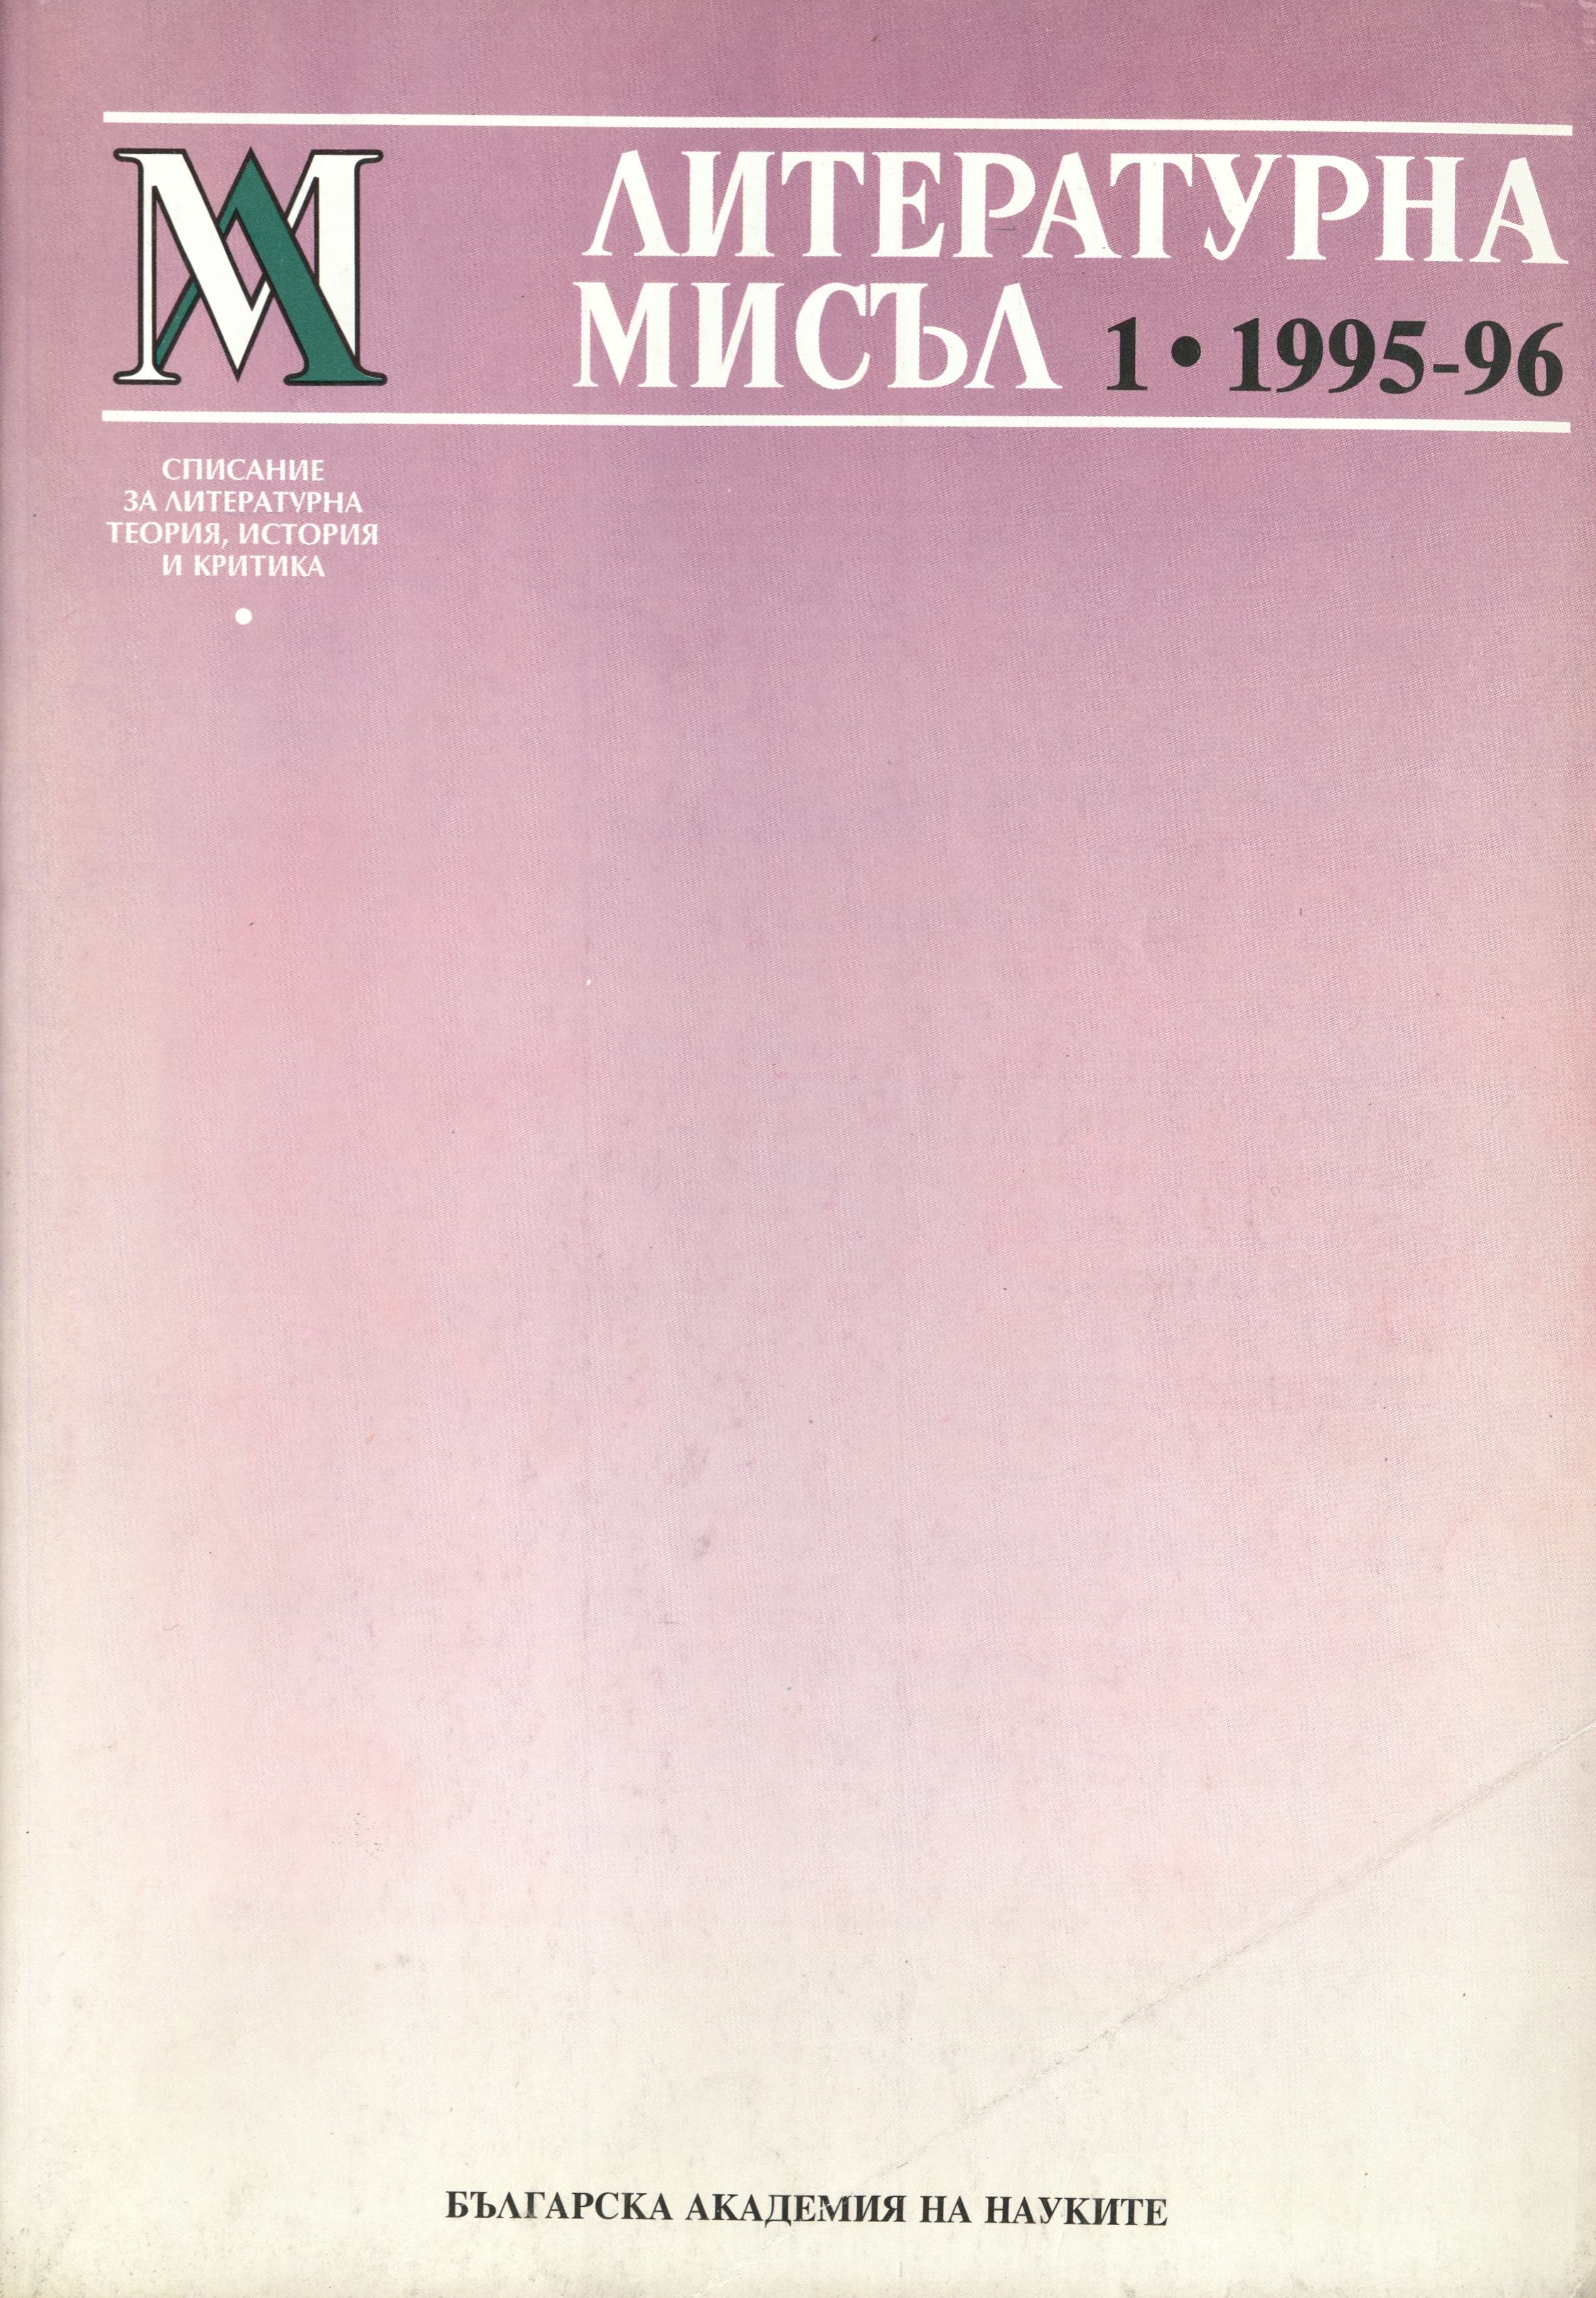 Issue 1, 1995-1996